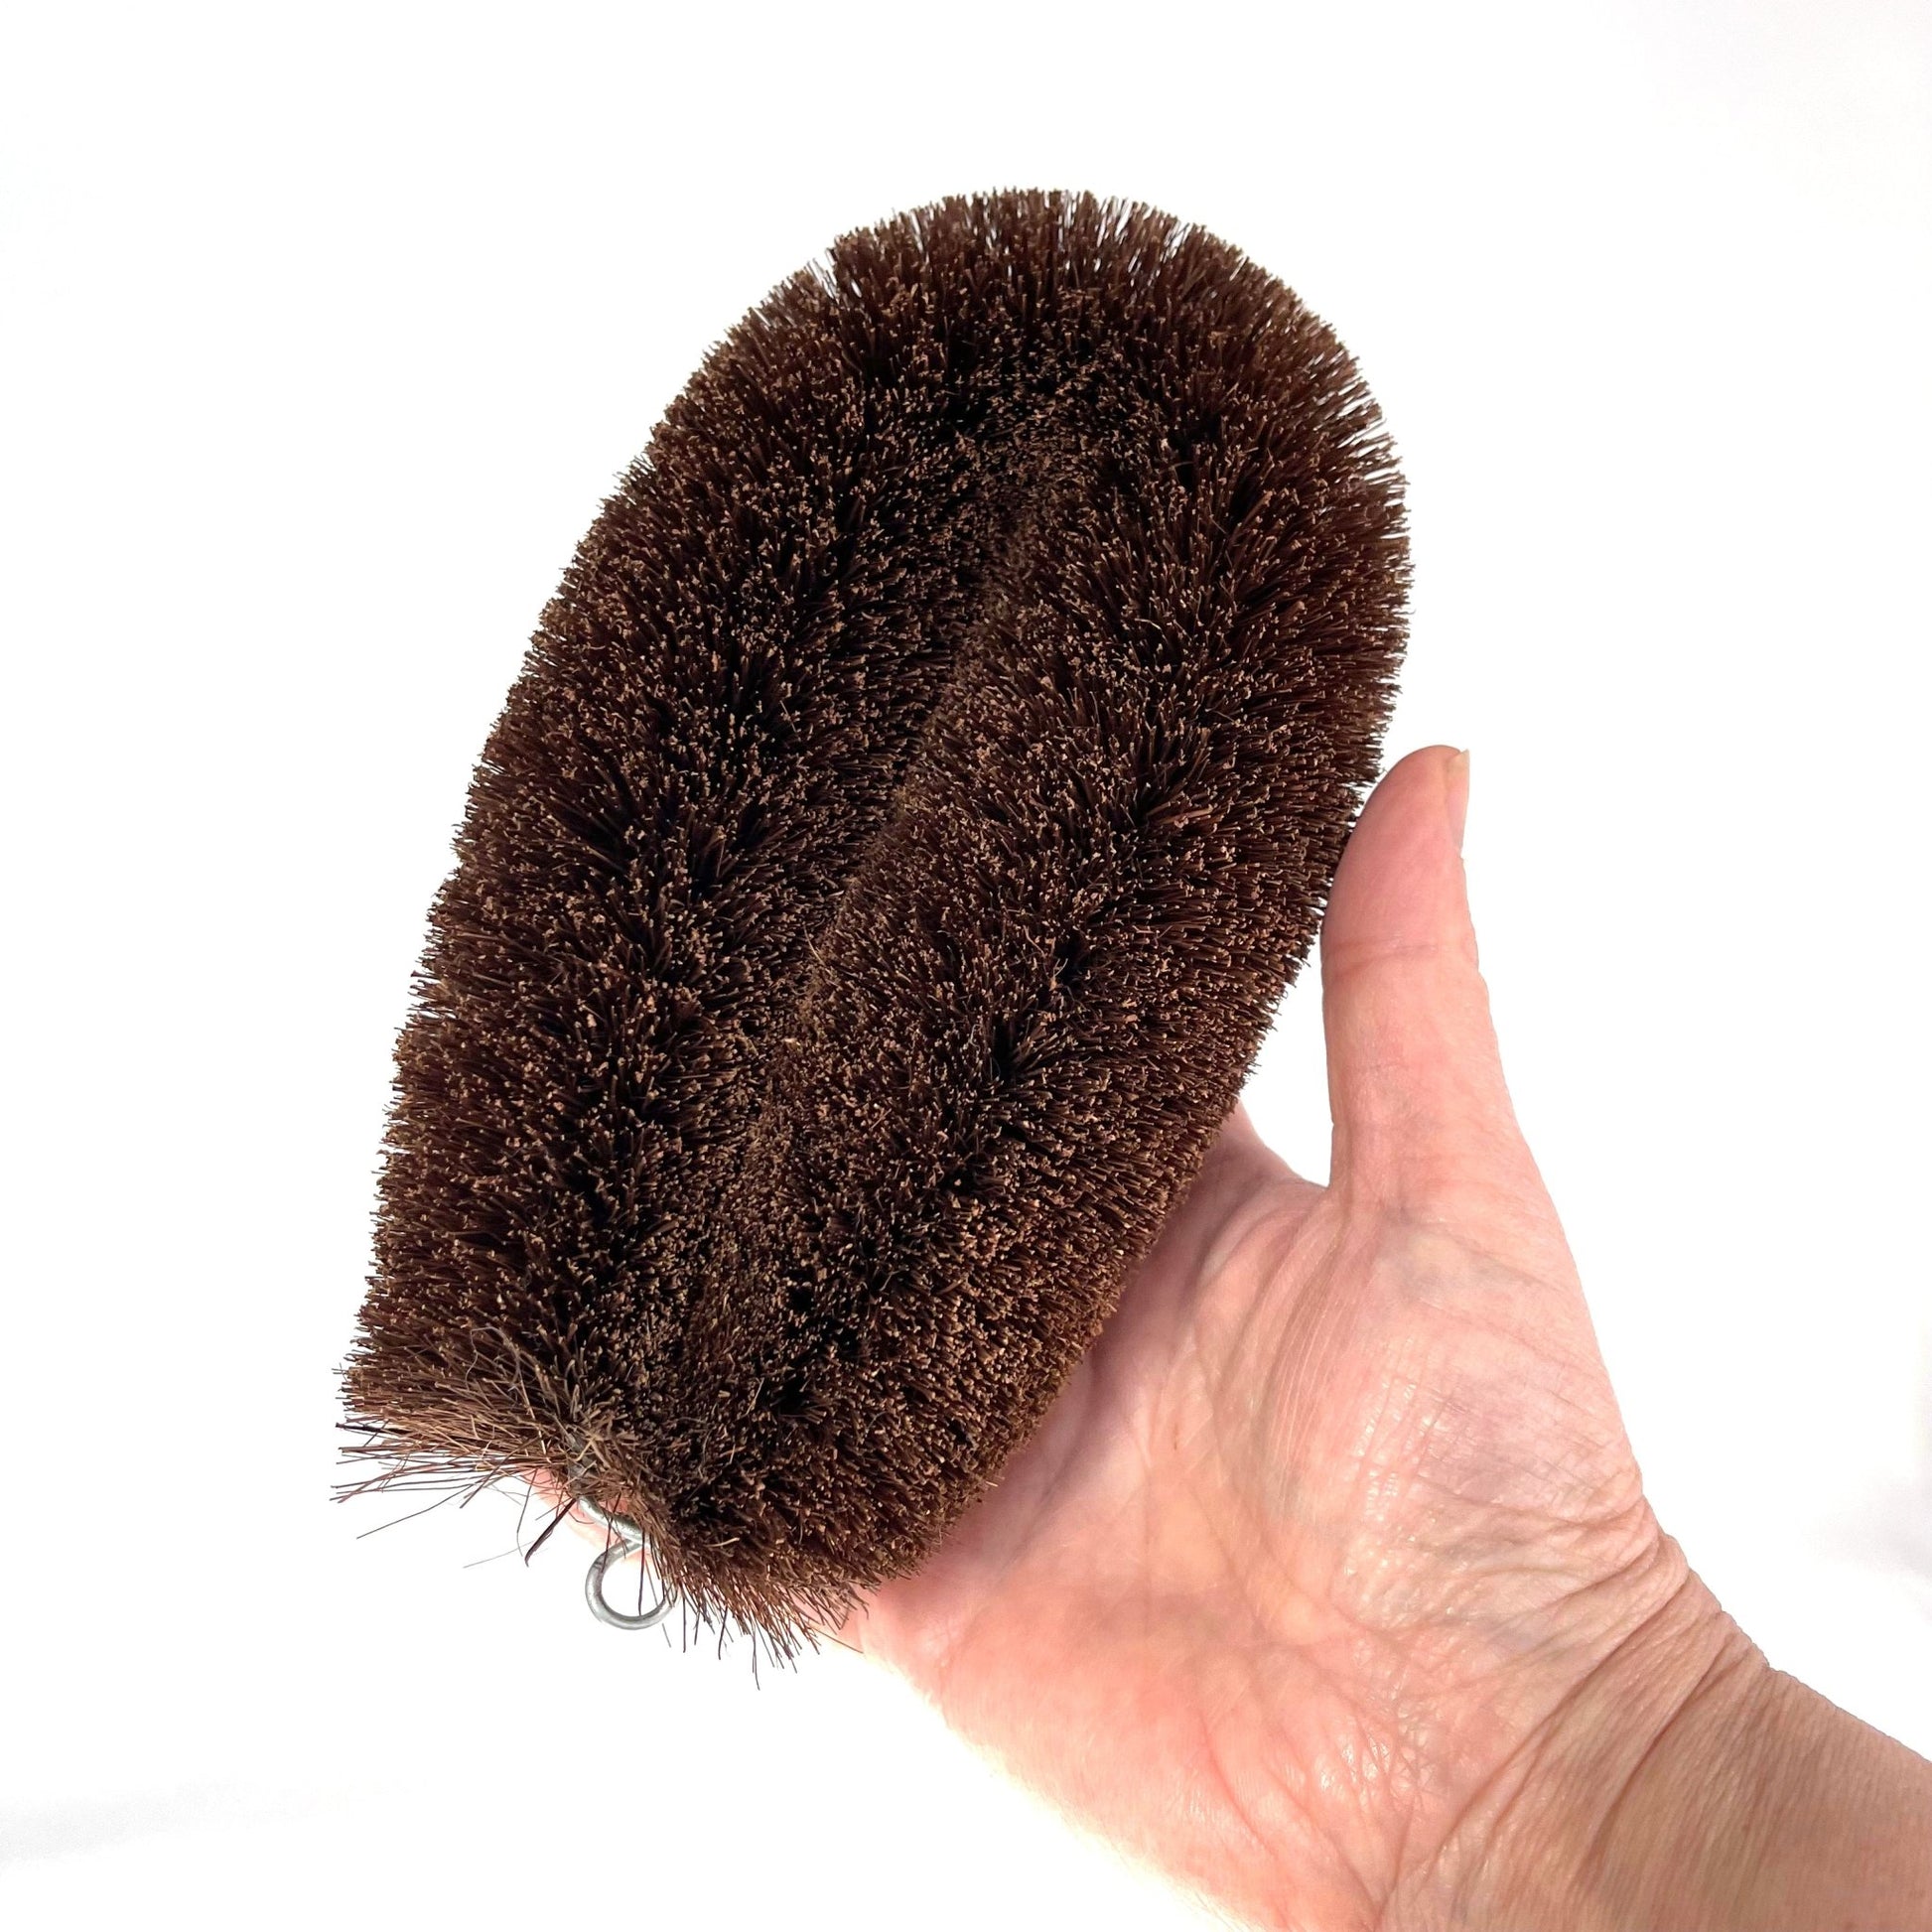 Tawashi – Best Pot Scrubber from Japan